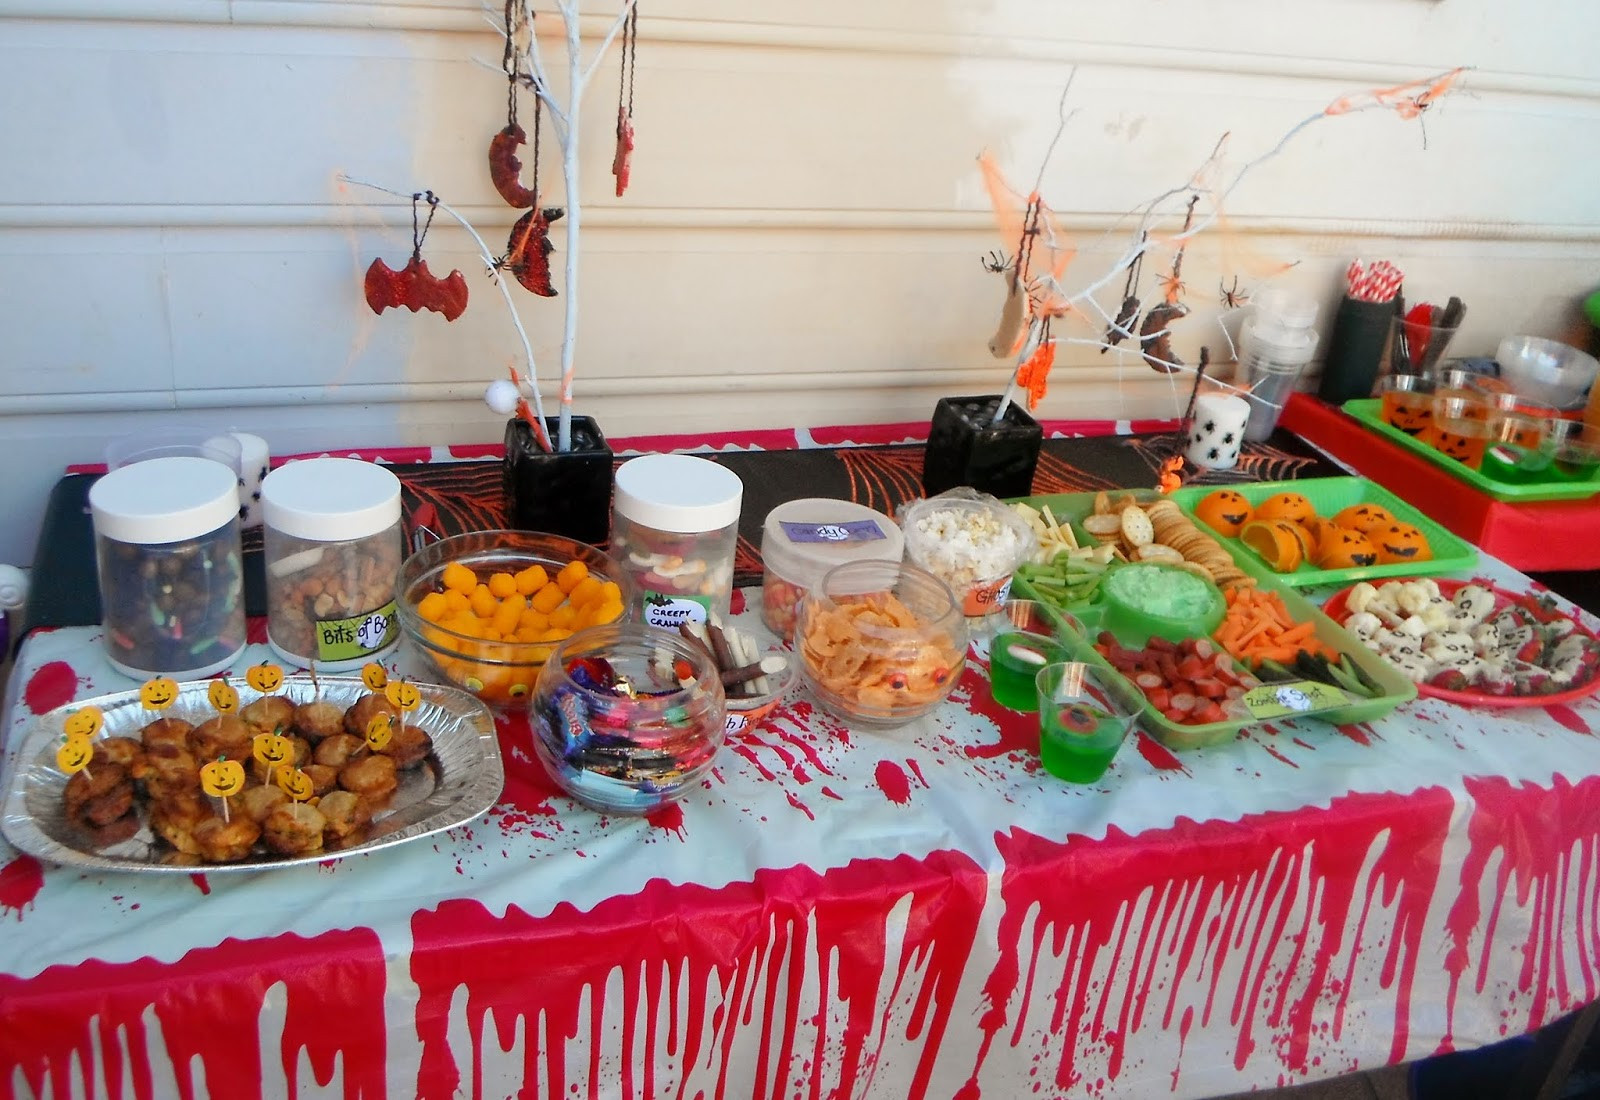 Halloween Party Snack Ideas For Kids
 Adventures at home with Mum Halloween Party Food